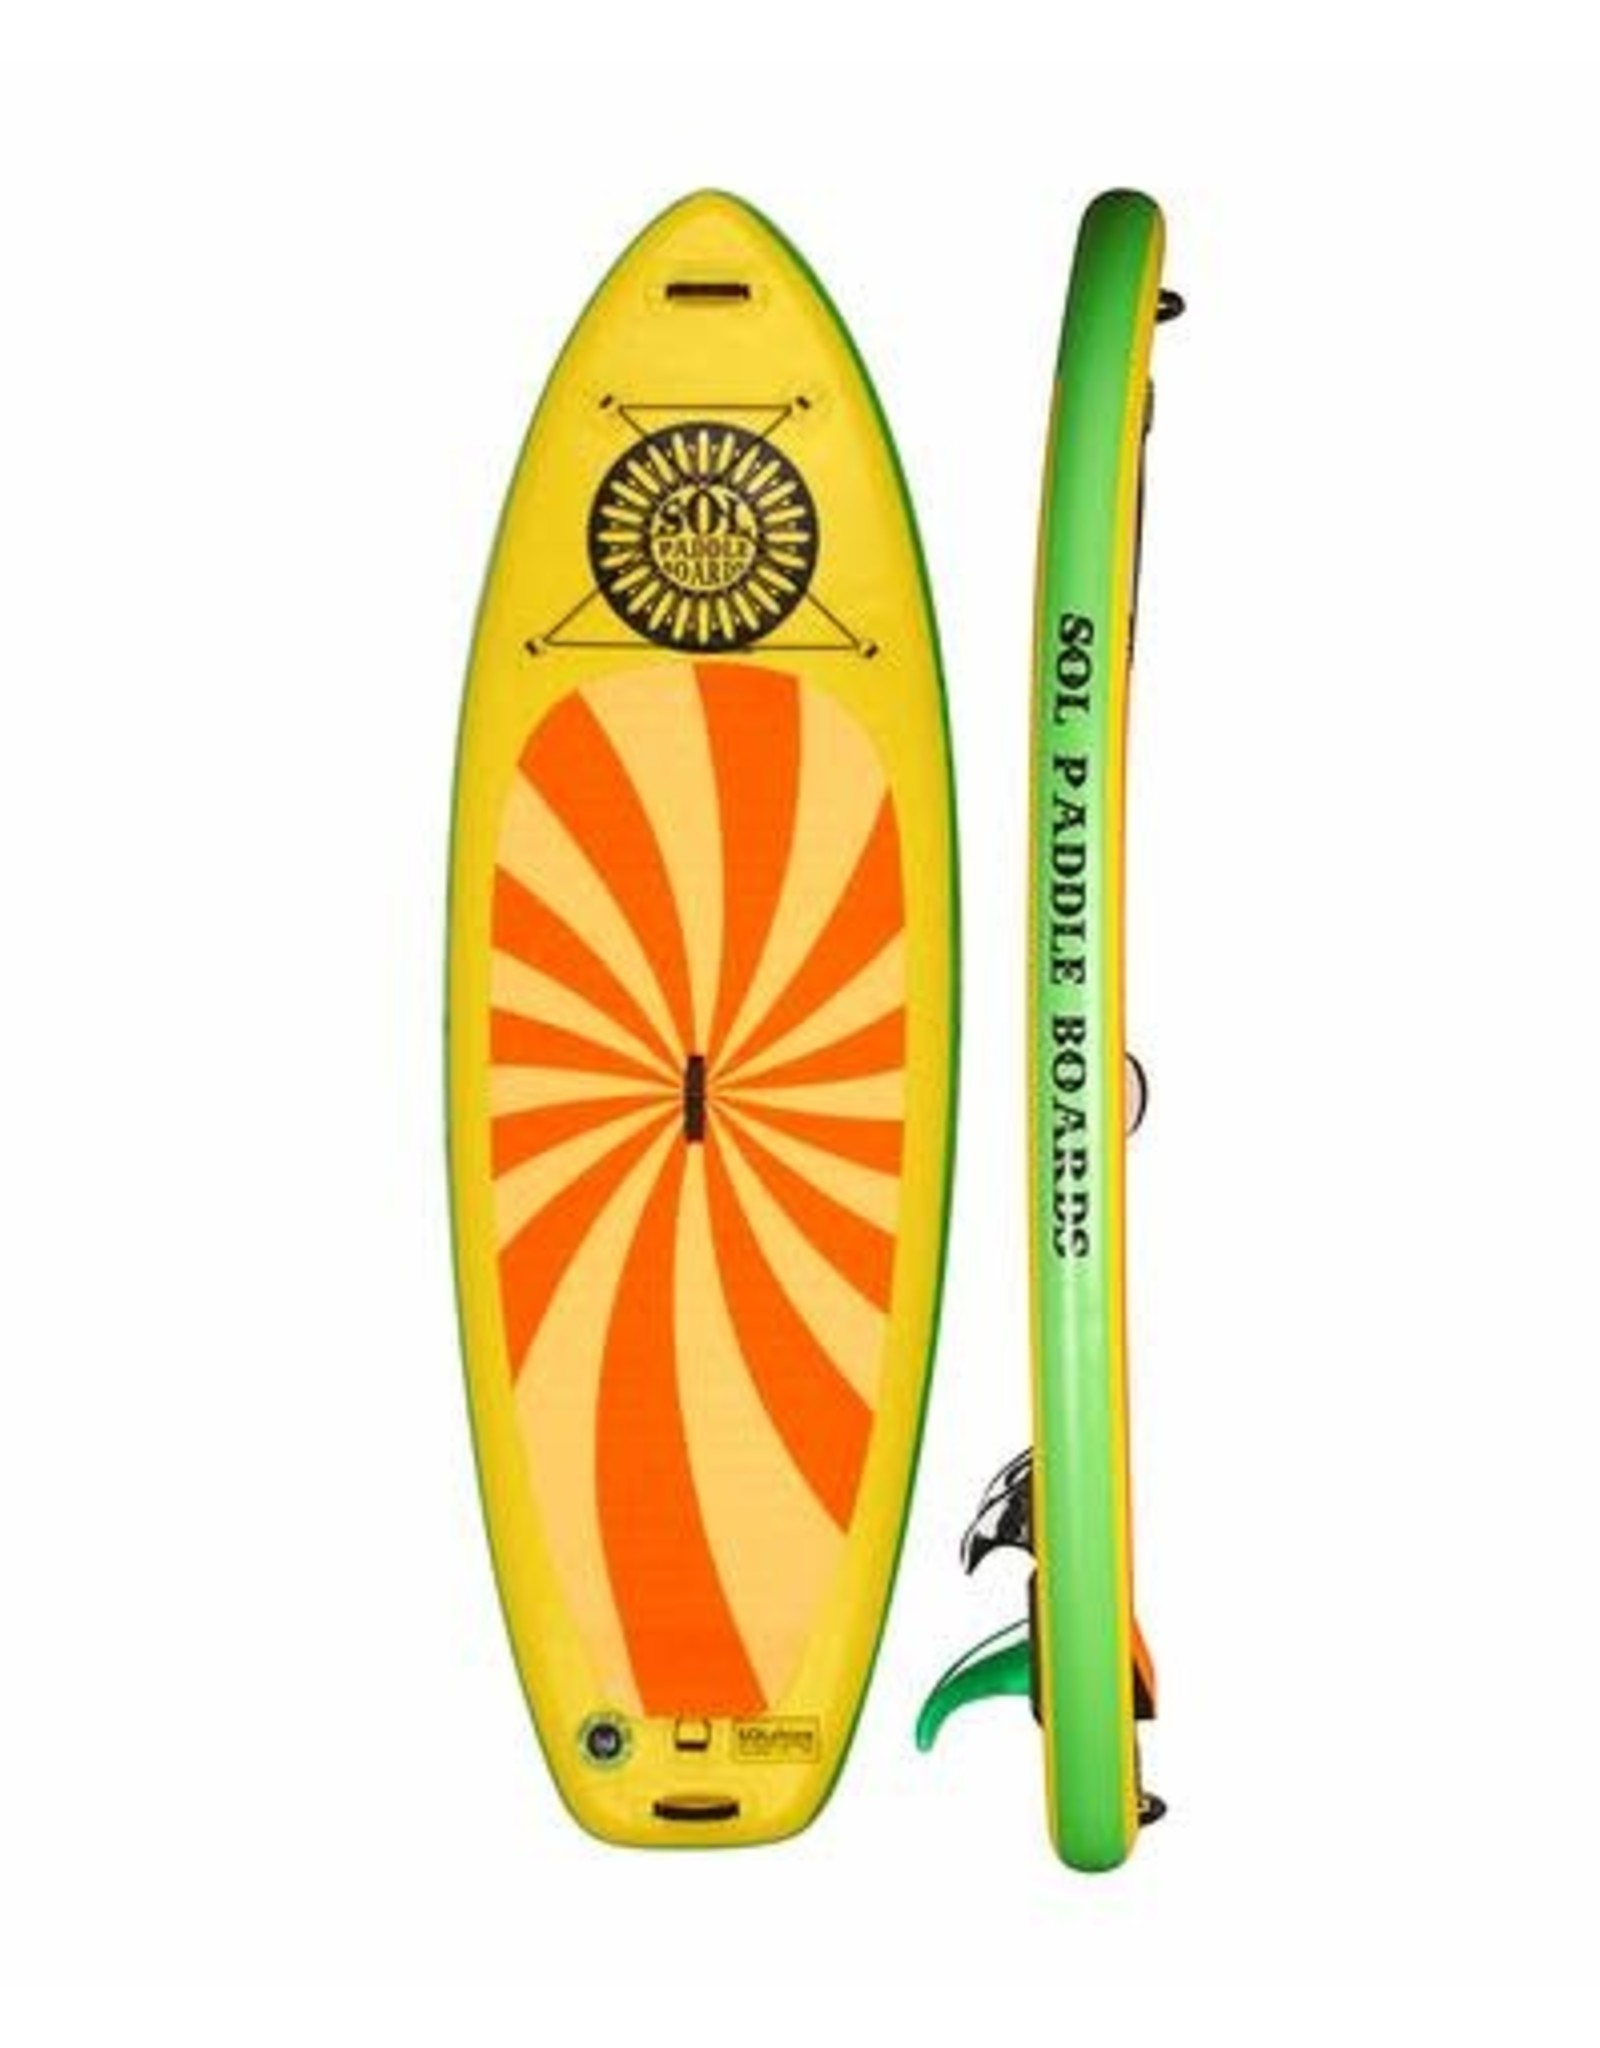 SOL SOLShine Classic Inflatable Stand-Up Paddleboard 9'6"